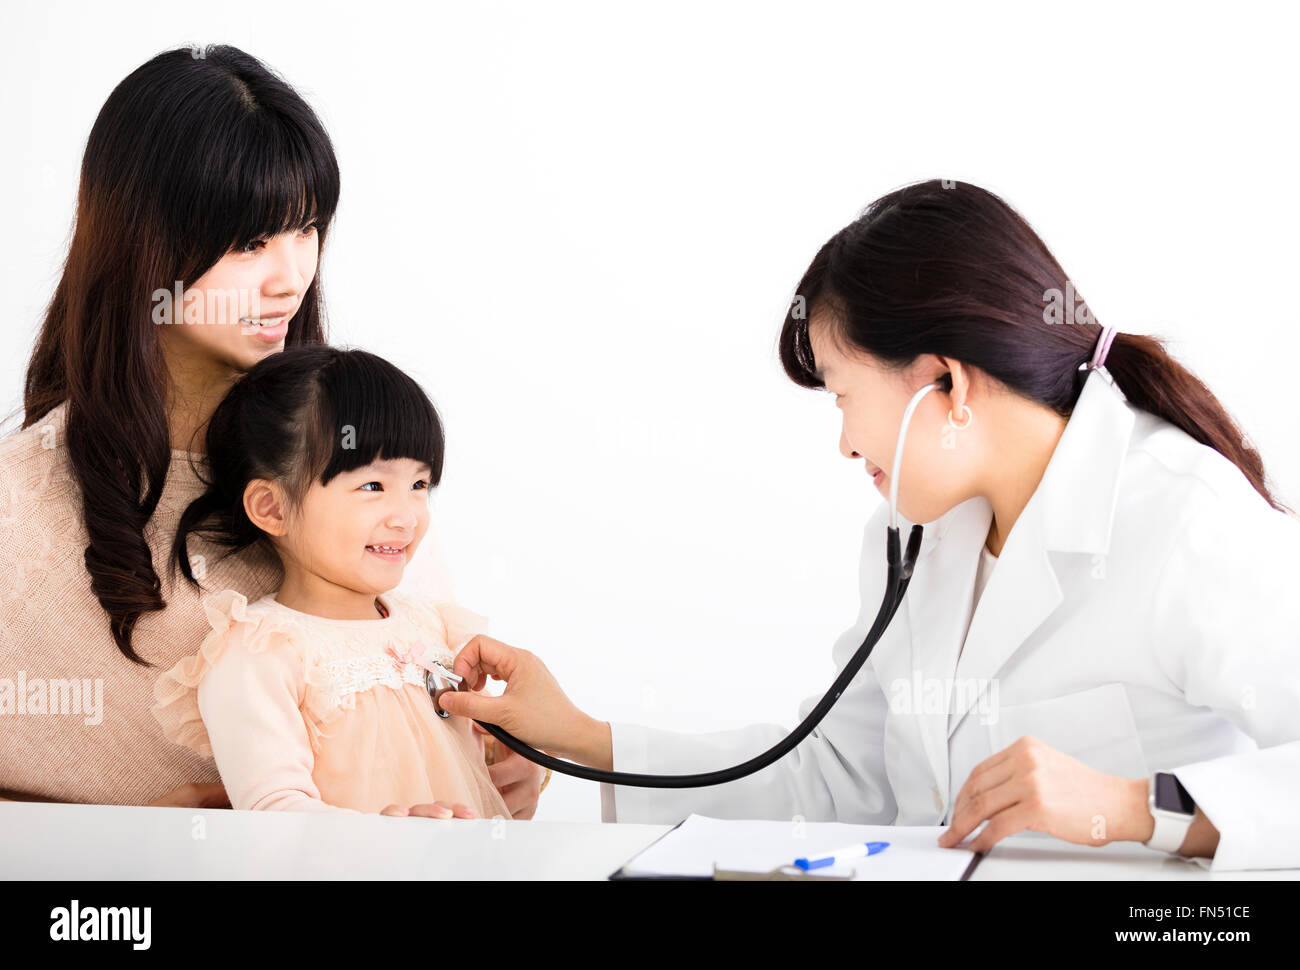 young female doctor examining a child patient Stock Photo